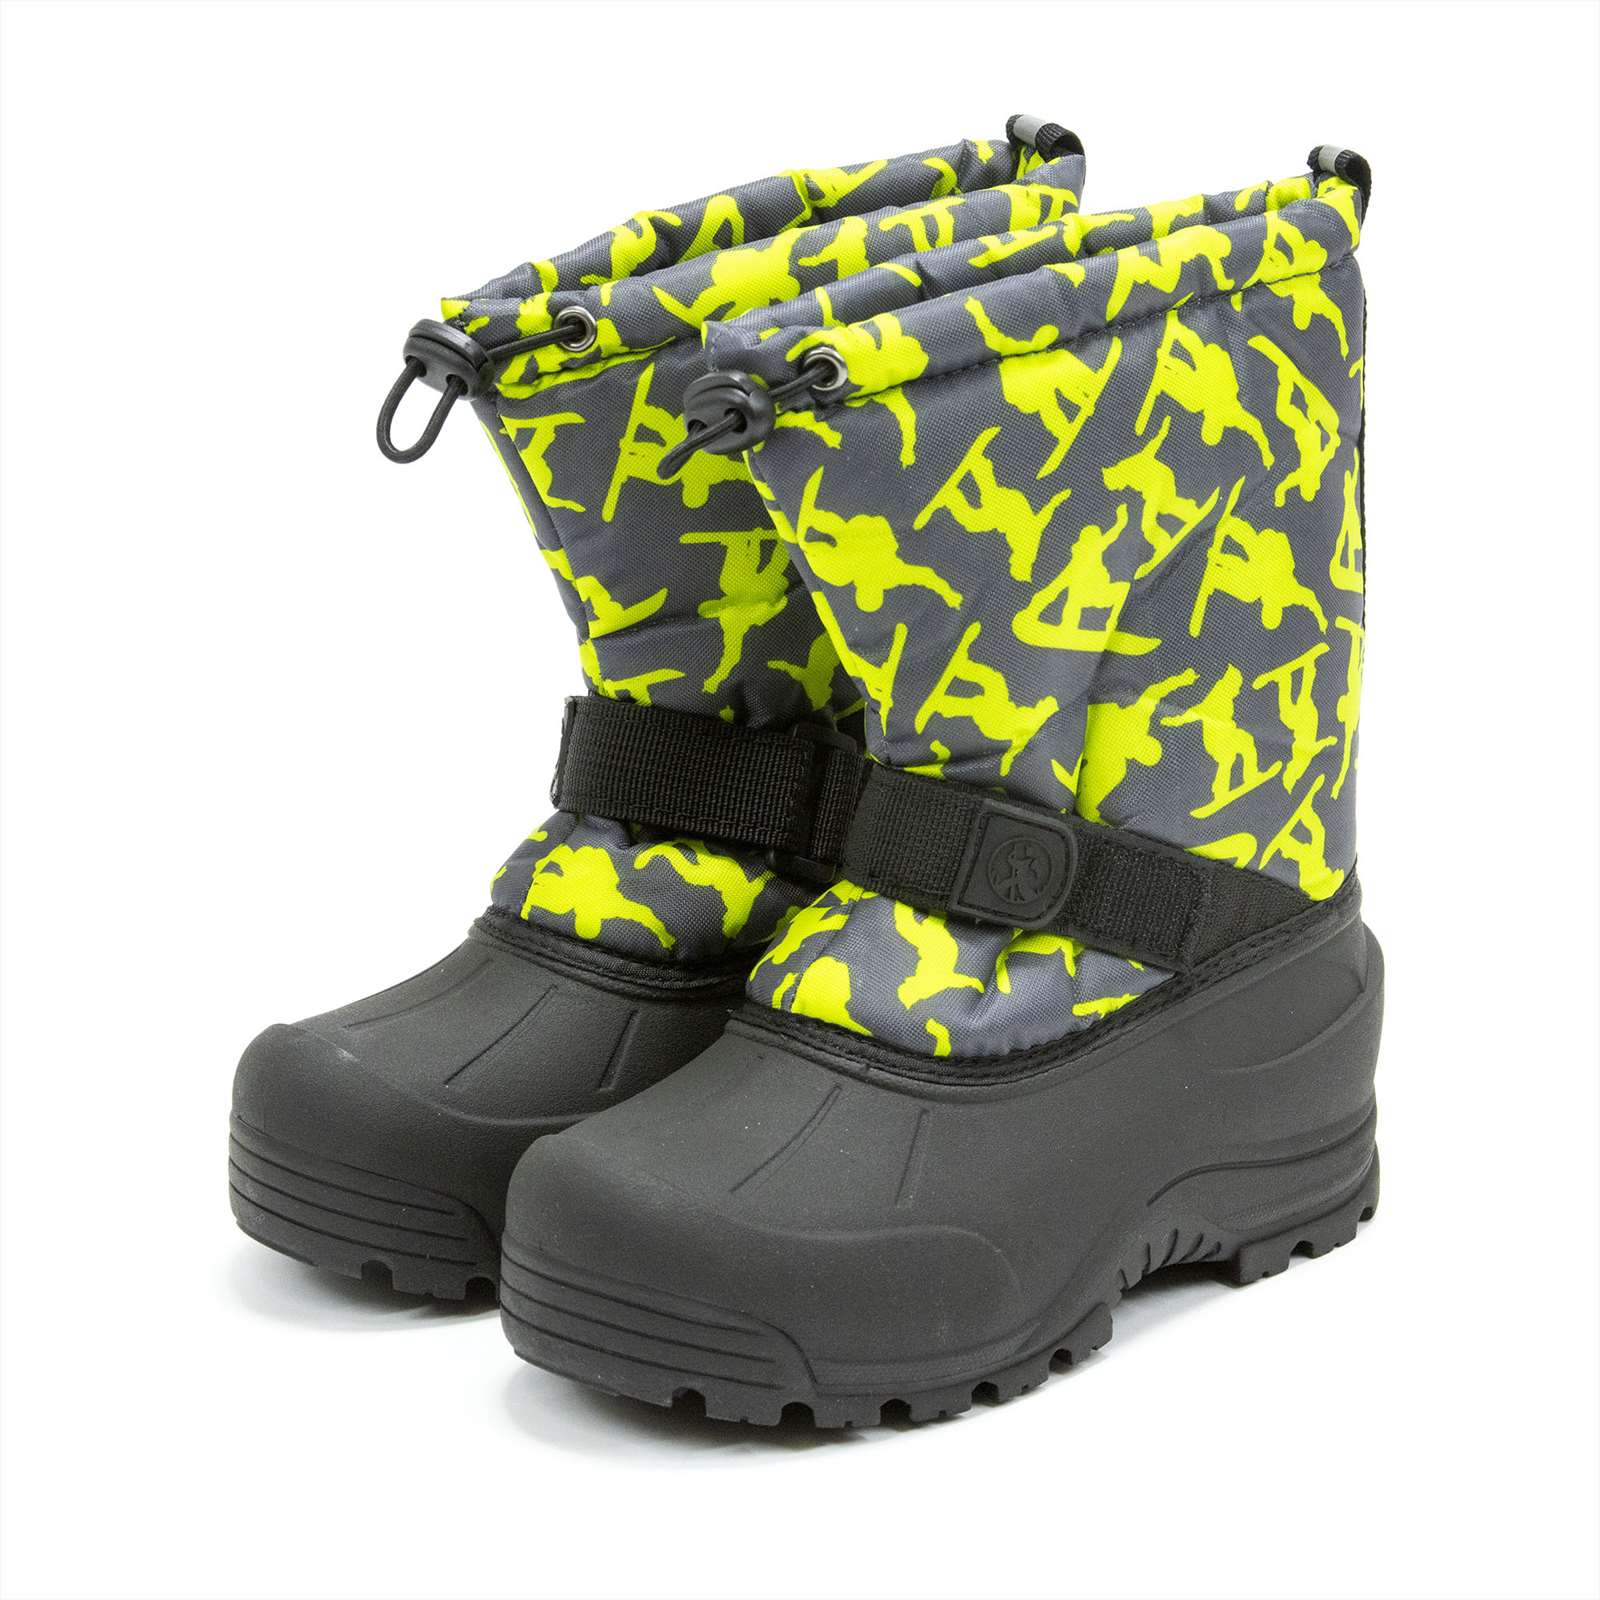 Northside Boy Frosty Insulated Snow Boot